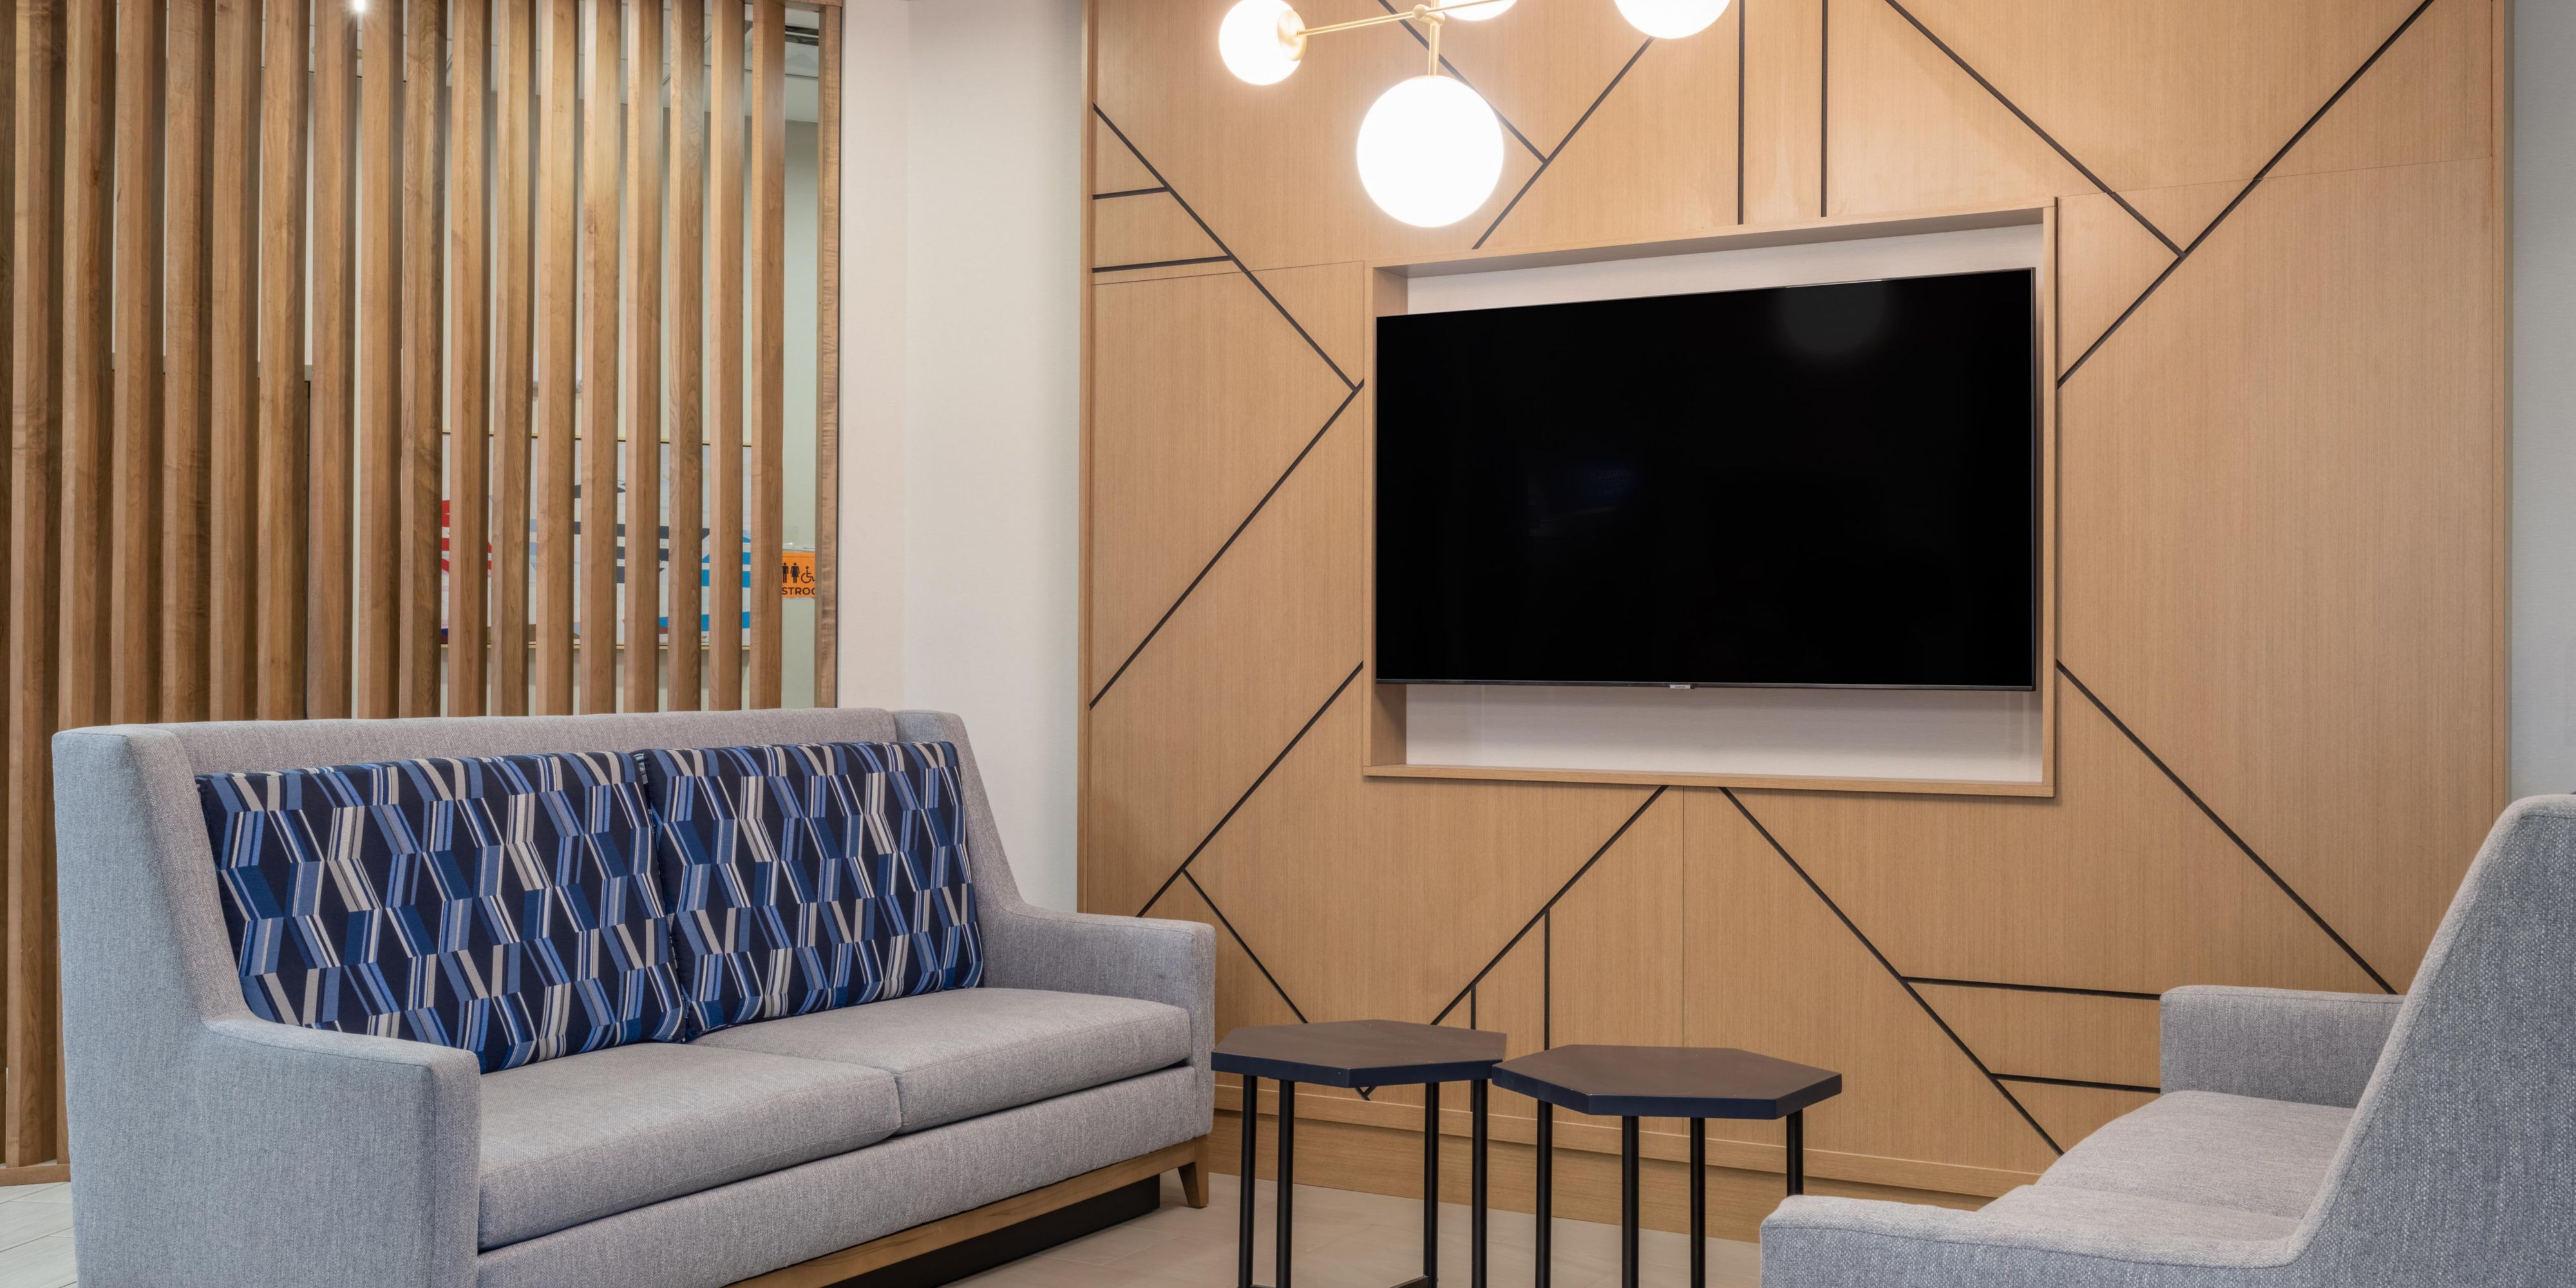 Stay smart and rest easy in our newly renovated hotel in Greensboro. With thoughtful touches and designed for today’s traveler, relax in our fresh, newly renovated contemporary guest rooms, meet with friends in our revamped lobby, or workout in our newly added fitness center!